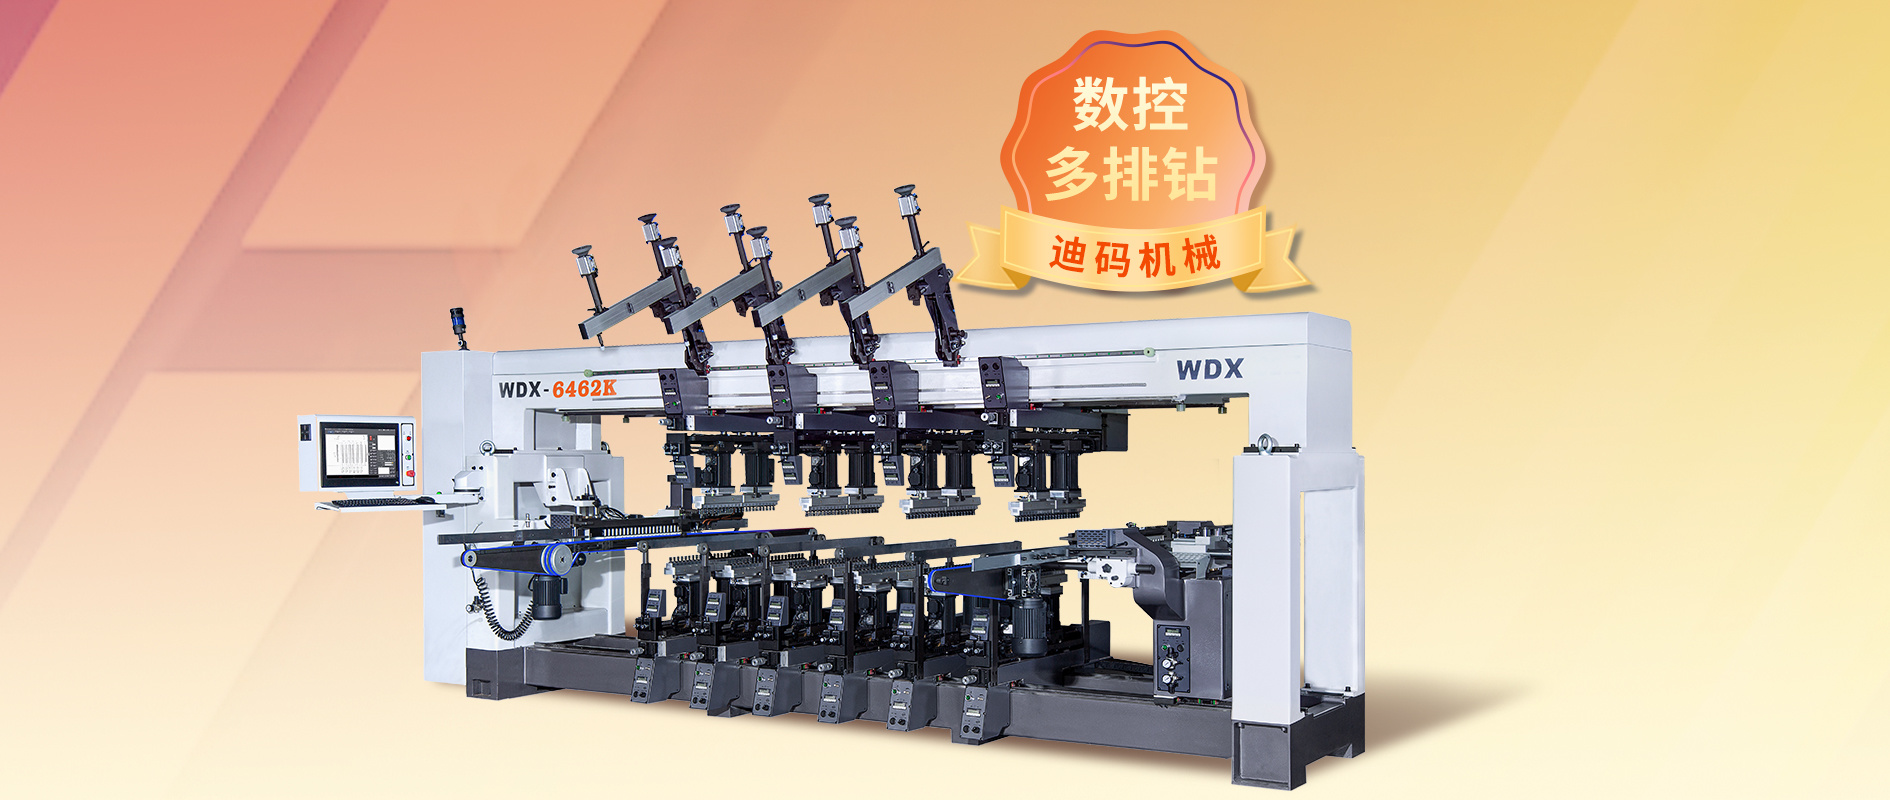 [Efficient and intelligent] WDX-6462K multi-row drill, drilling tool, quality choice!